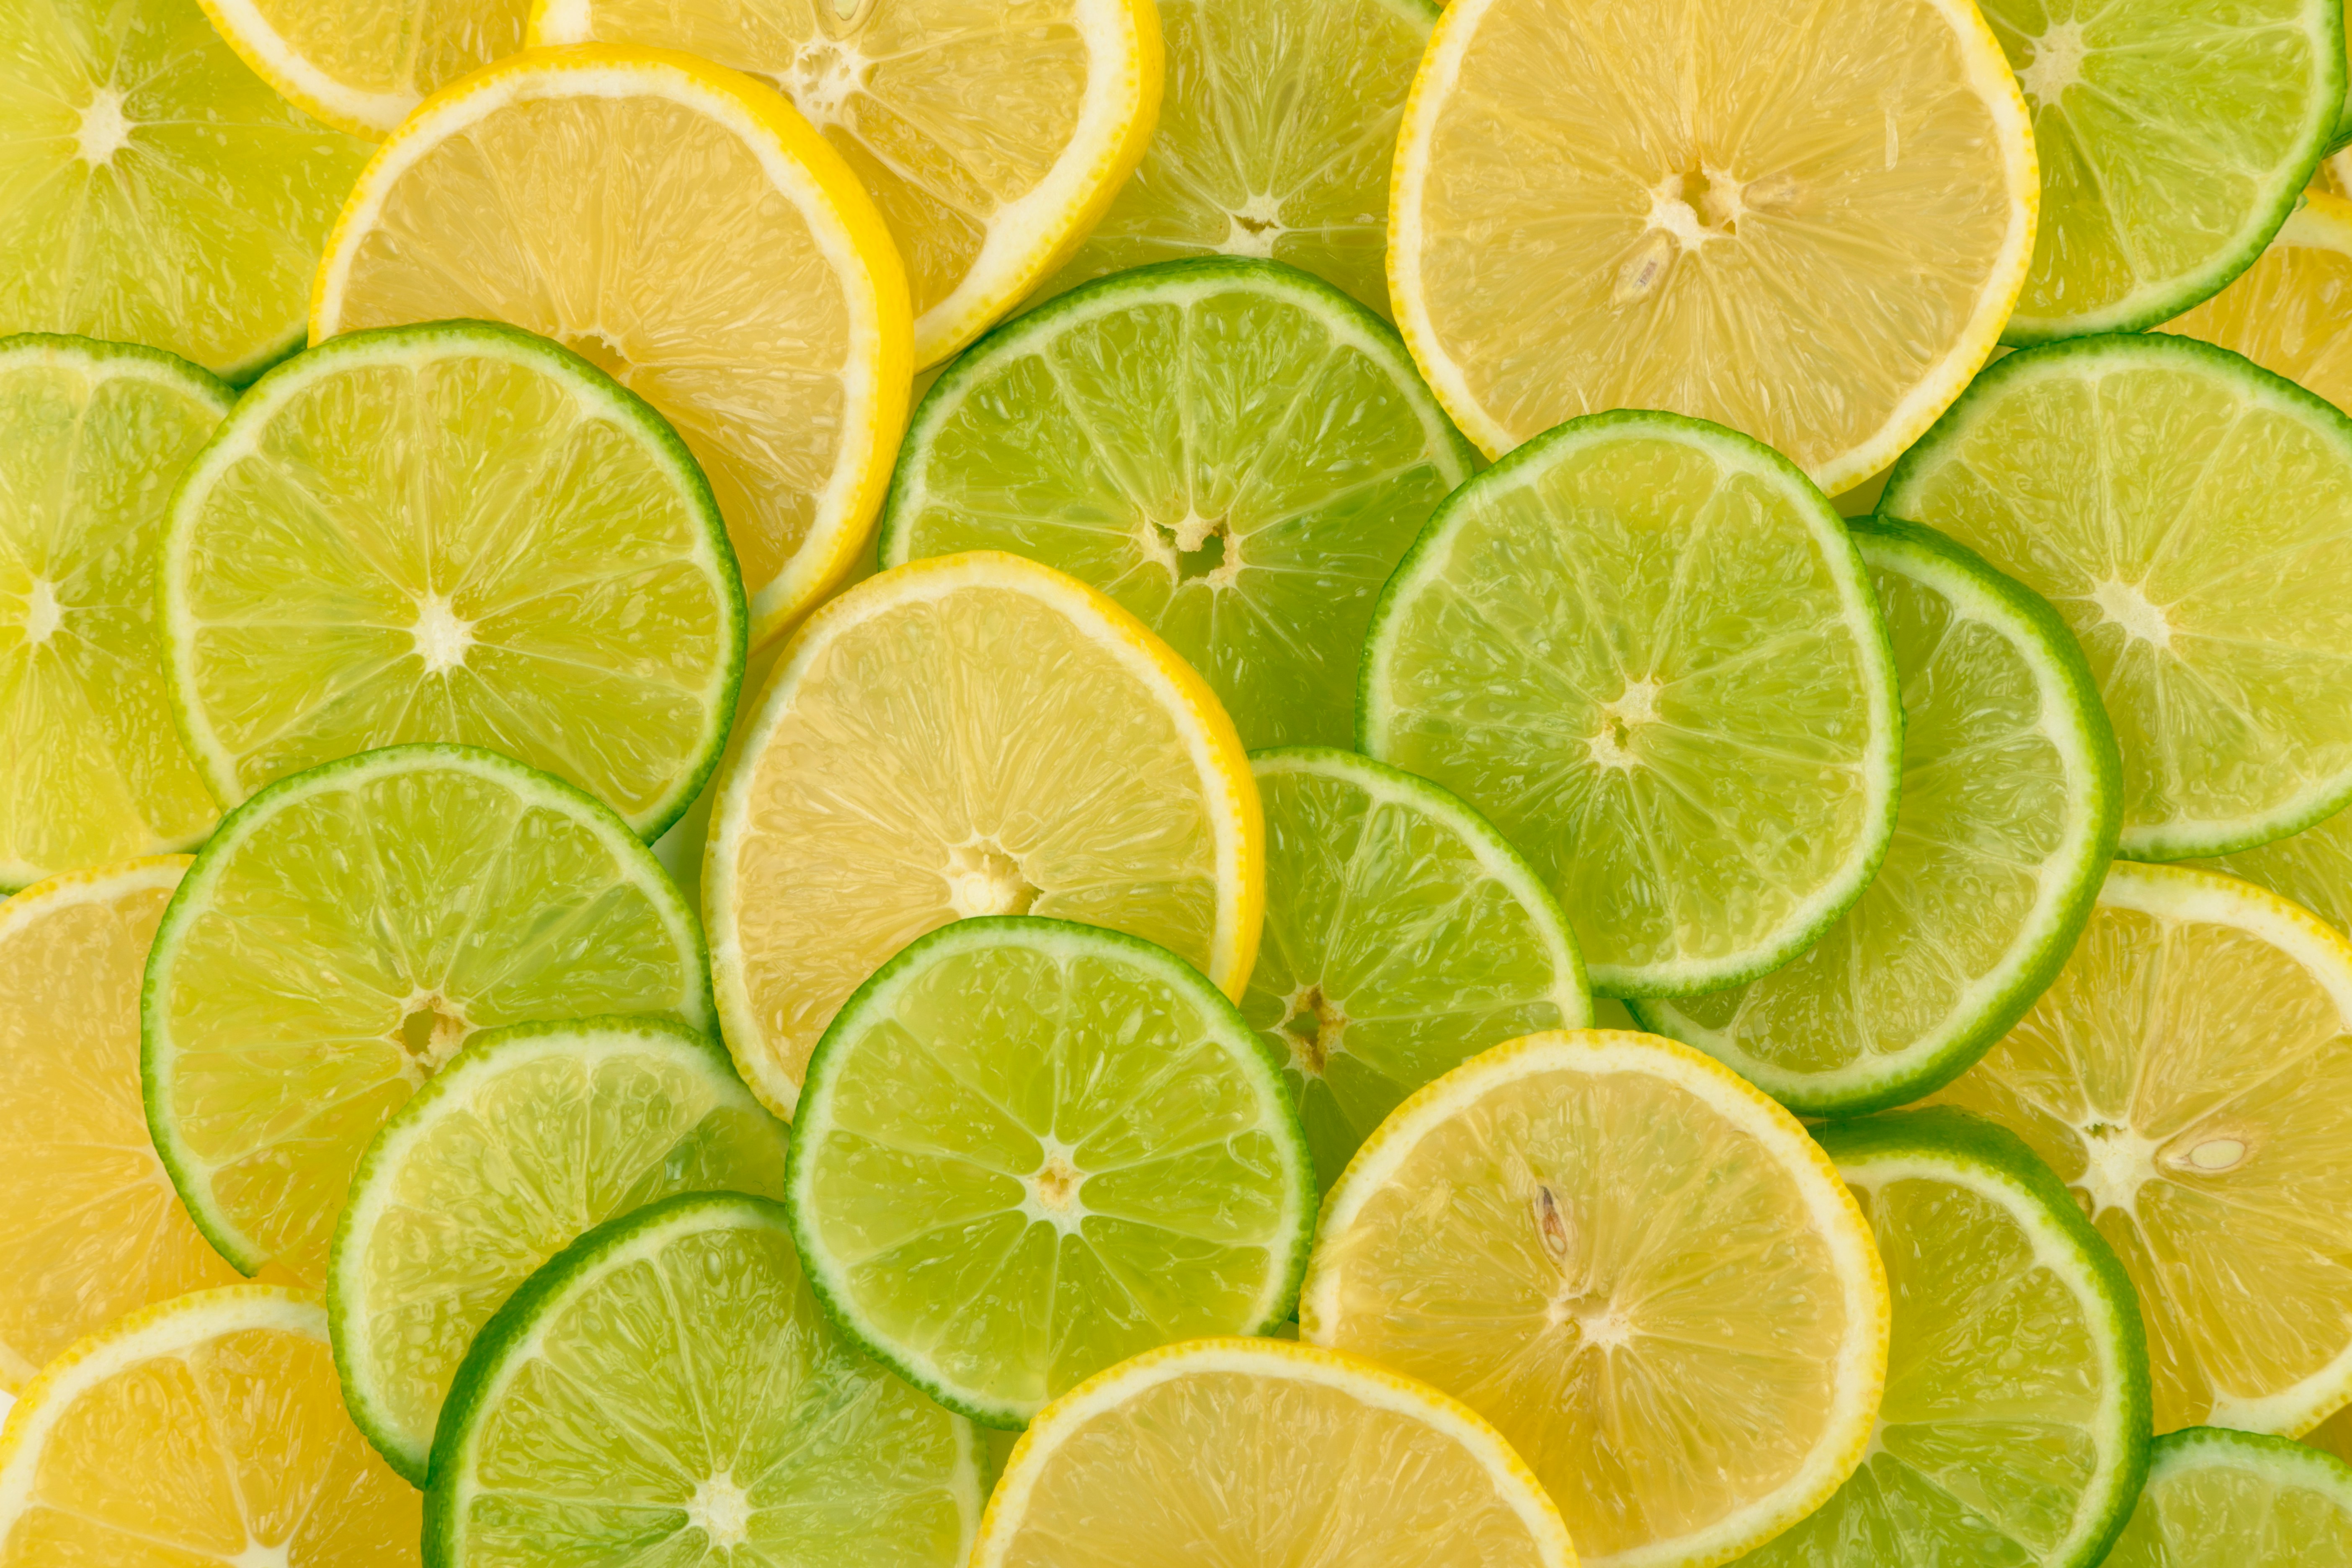 Recall On Lemons Limes Oranges Potatoes Issued In Several States Fda Says